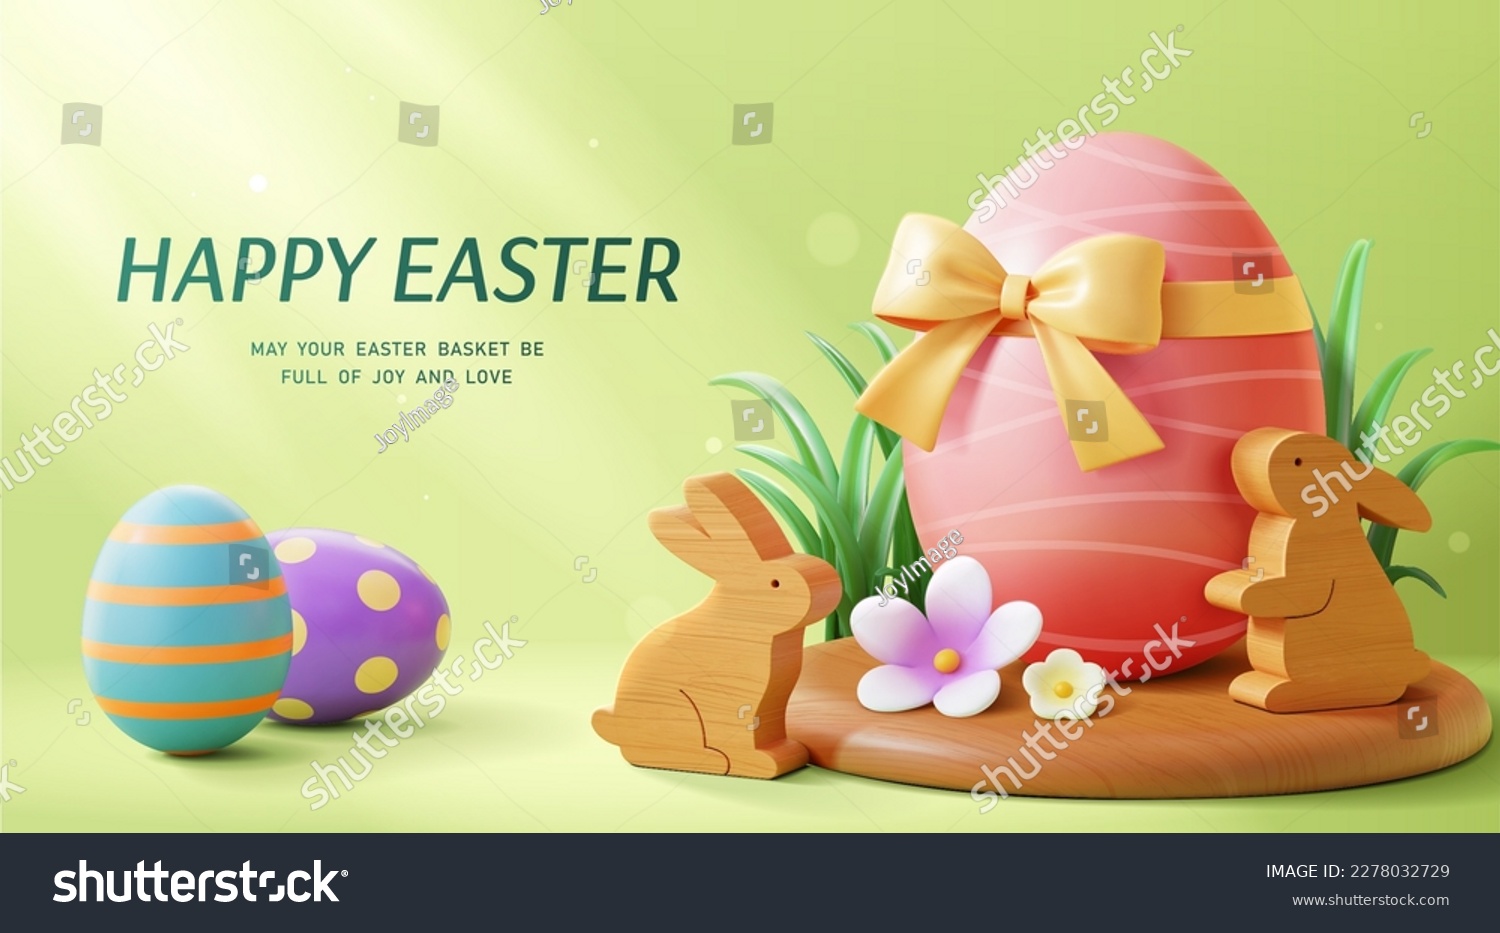 3D illustrated Easter poster. Giant painted egg with bow on wooden stage with rabbit ornament on apple green background. #2278032729